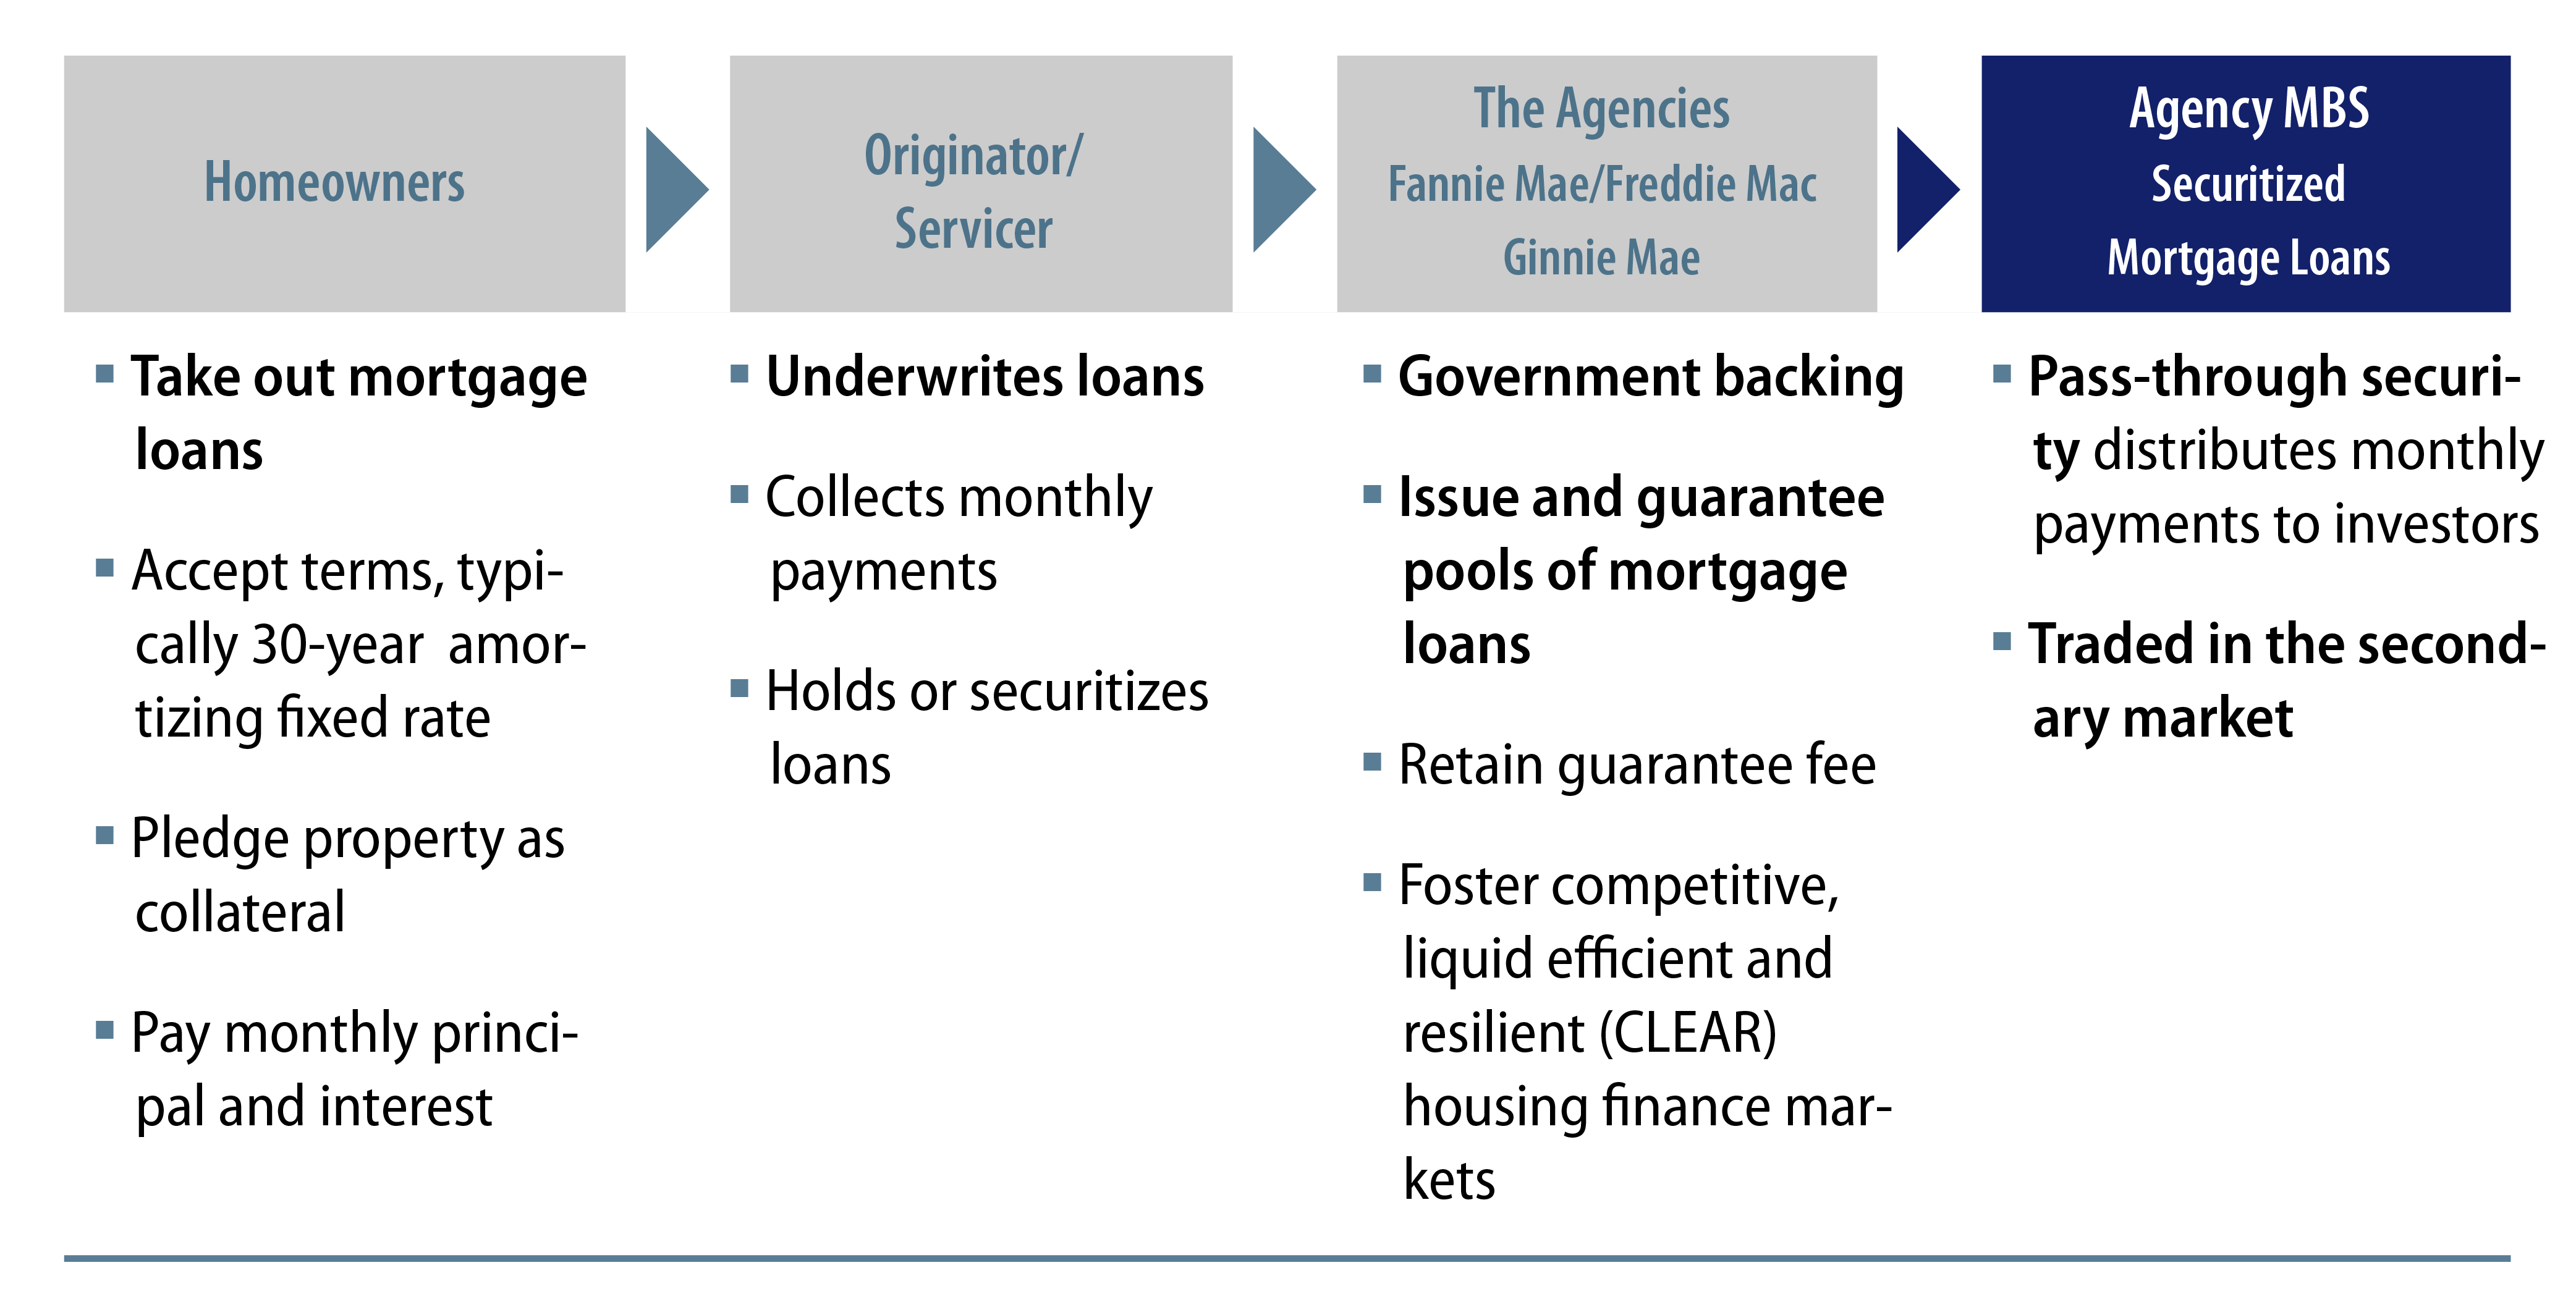 Explore Agency Securitization—From Homeowners to Agency MBS.